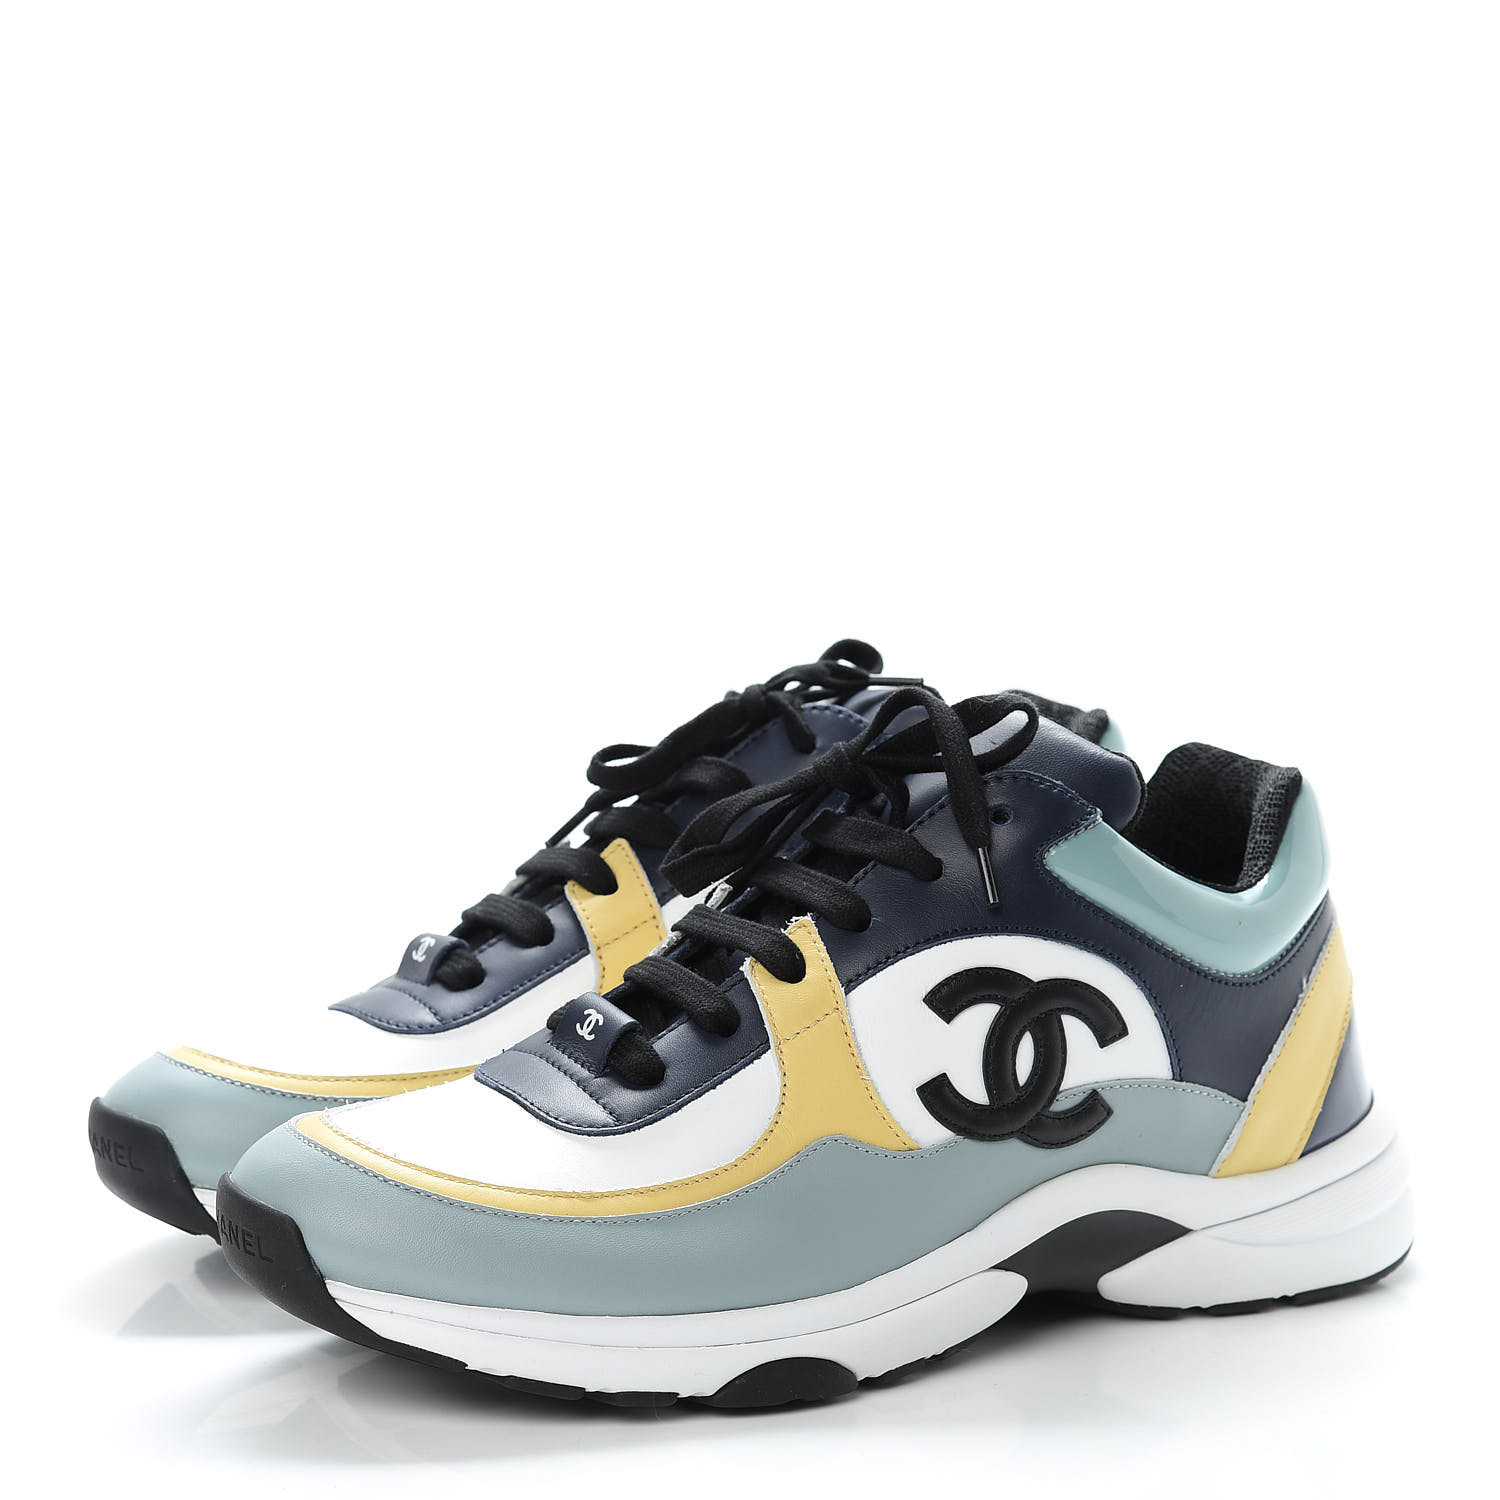 CHANEL Calfskin Patent CC Sneakers 41 White Blue Yellow 472851